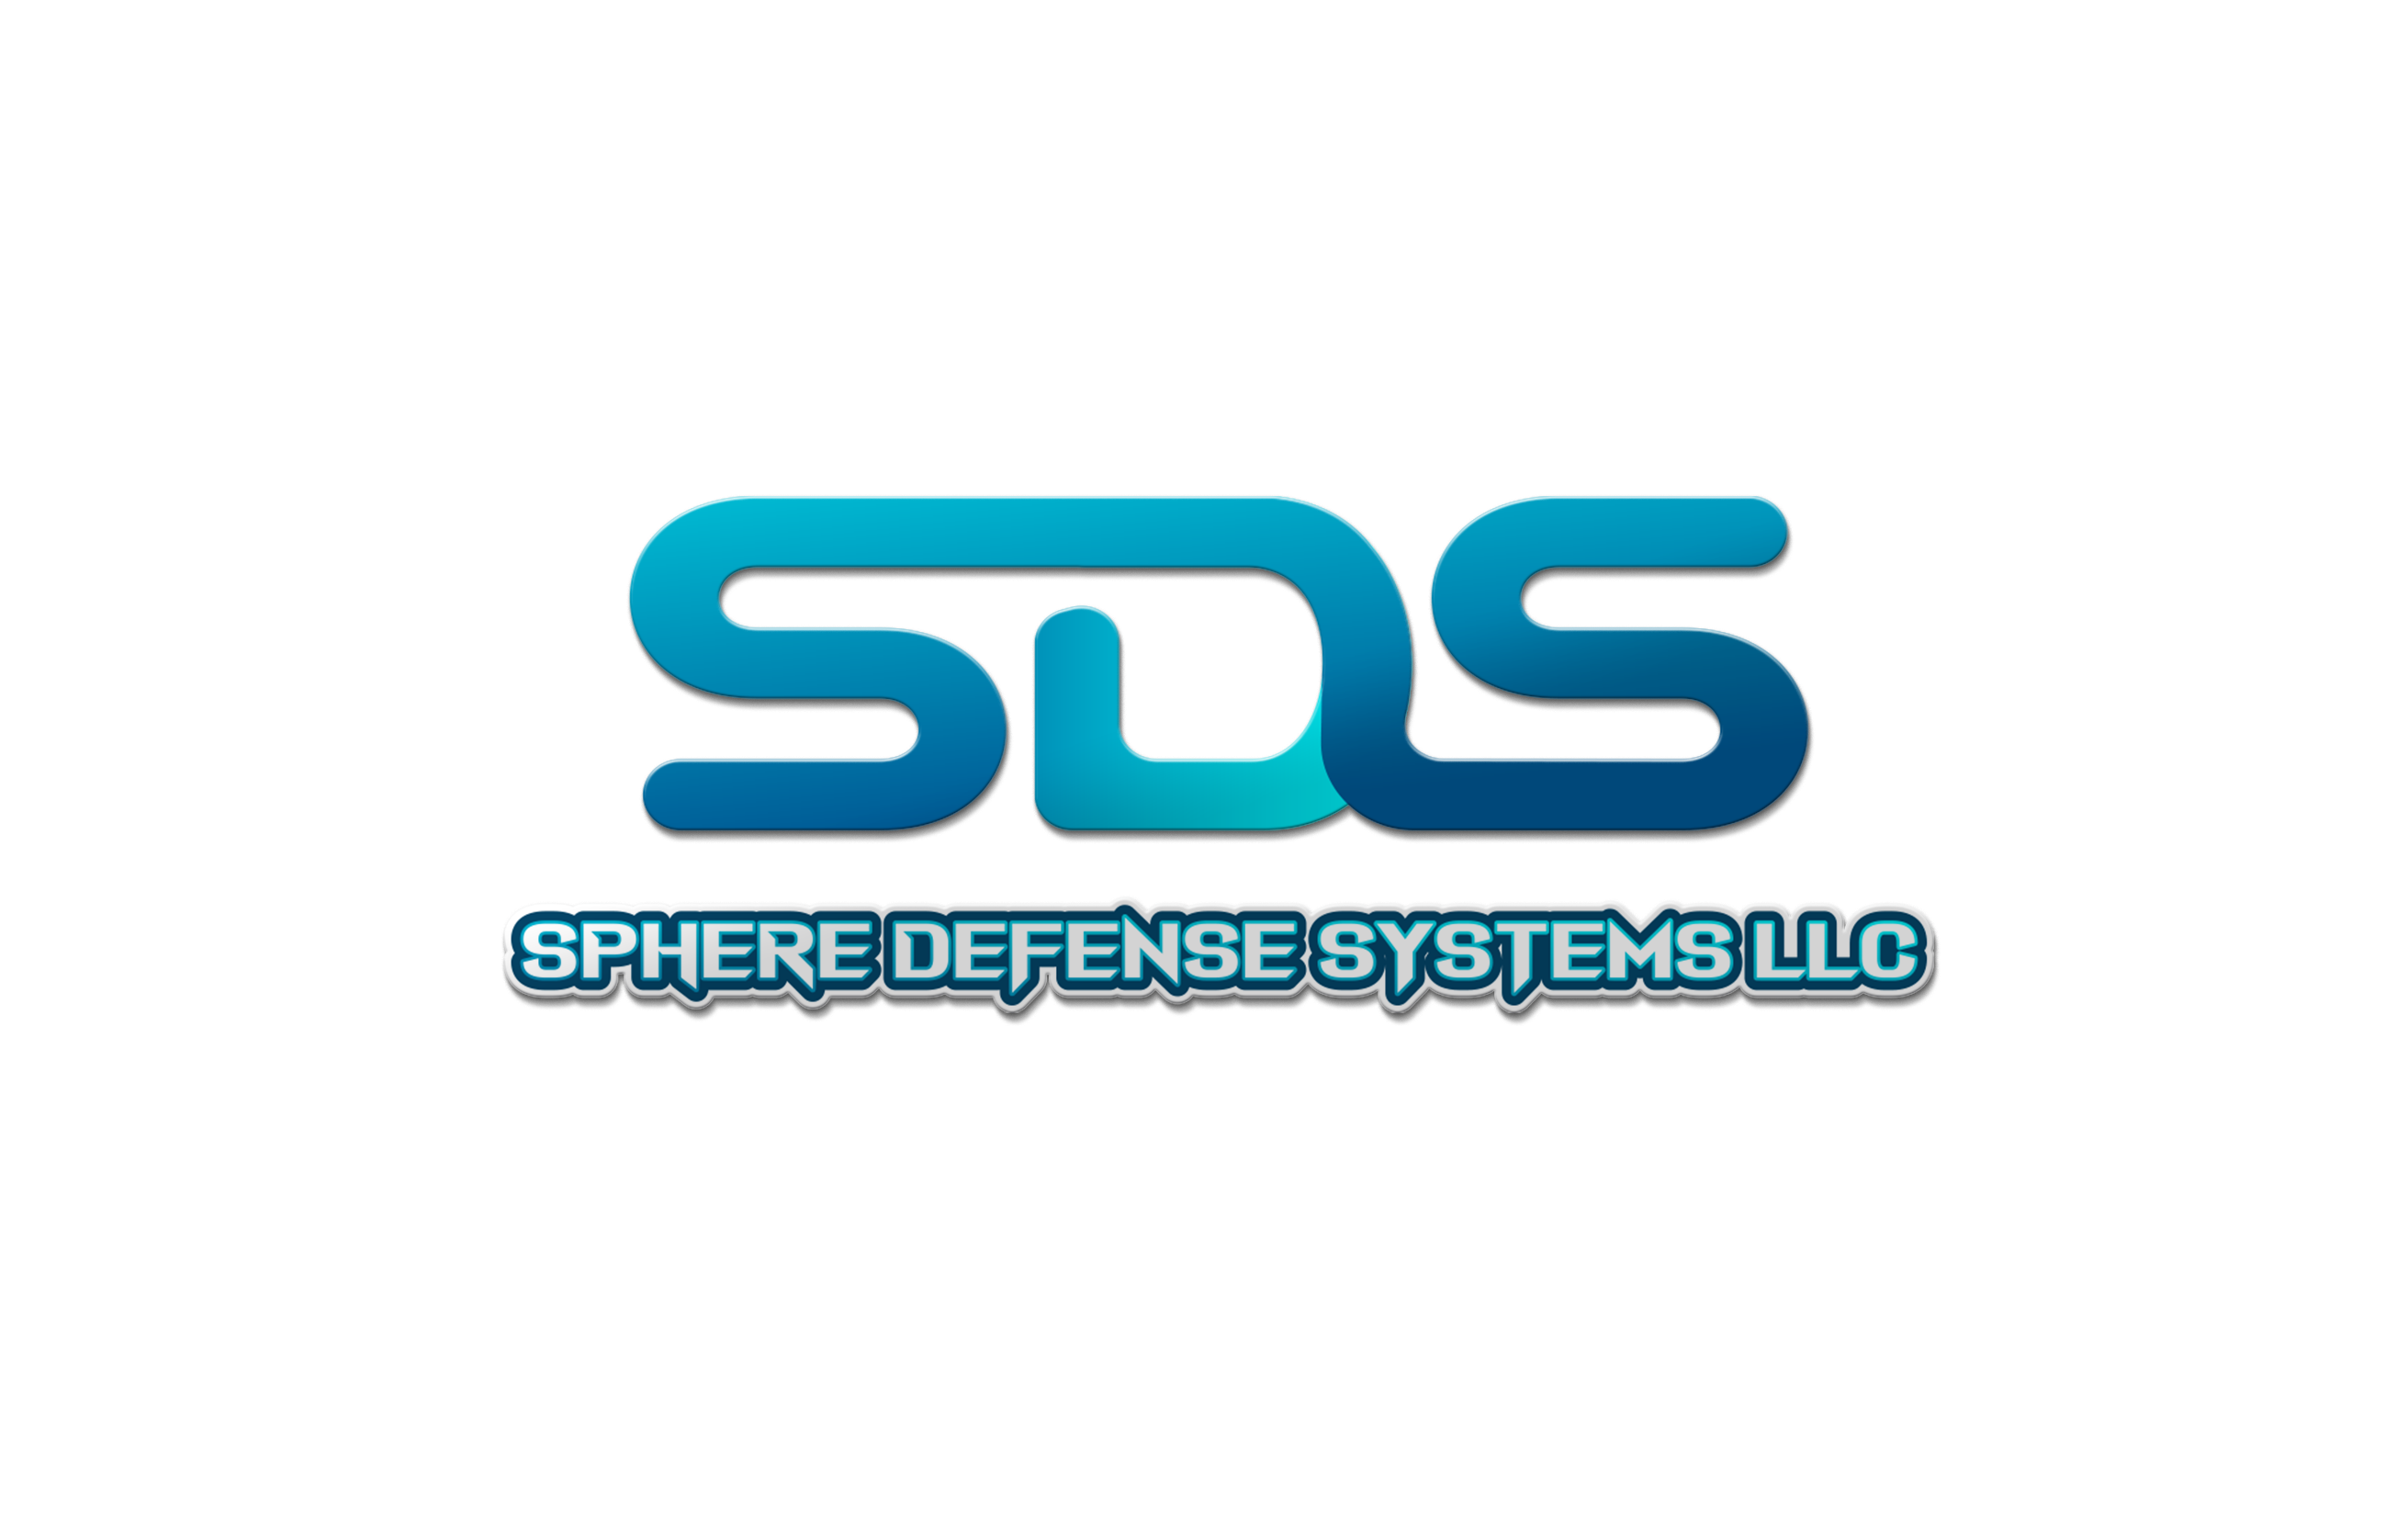 Sphere defense systems